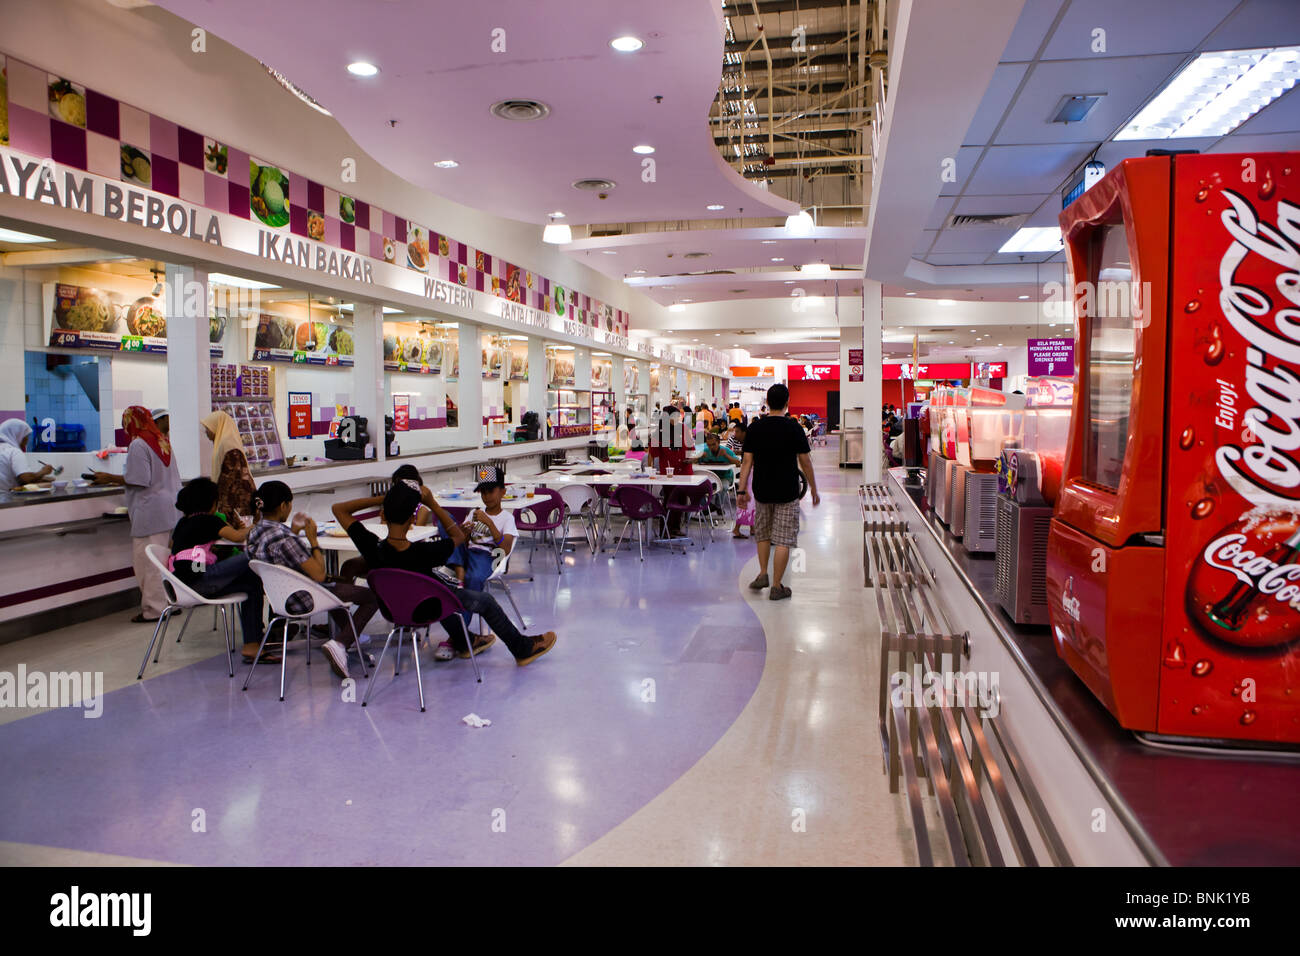 Malaysians relax in a new restaurant complex in Melaka, Malaysia Stock Photo